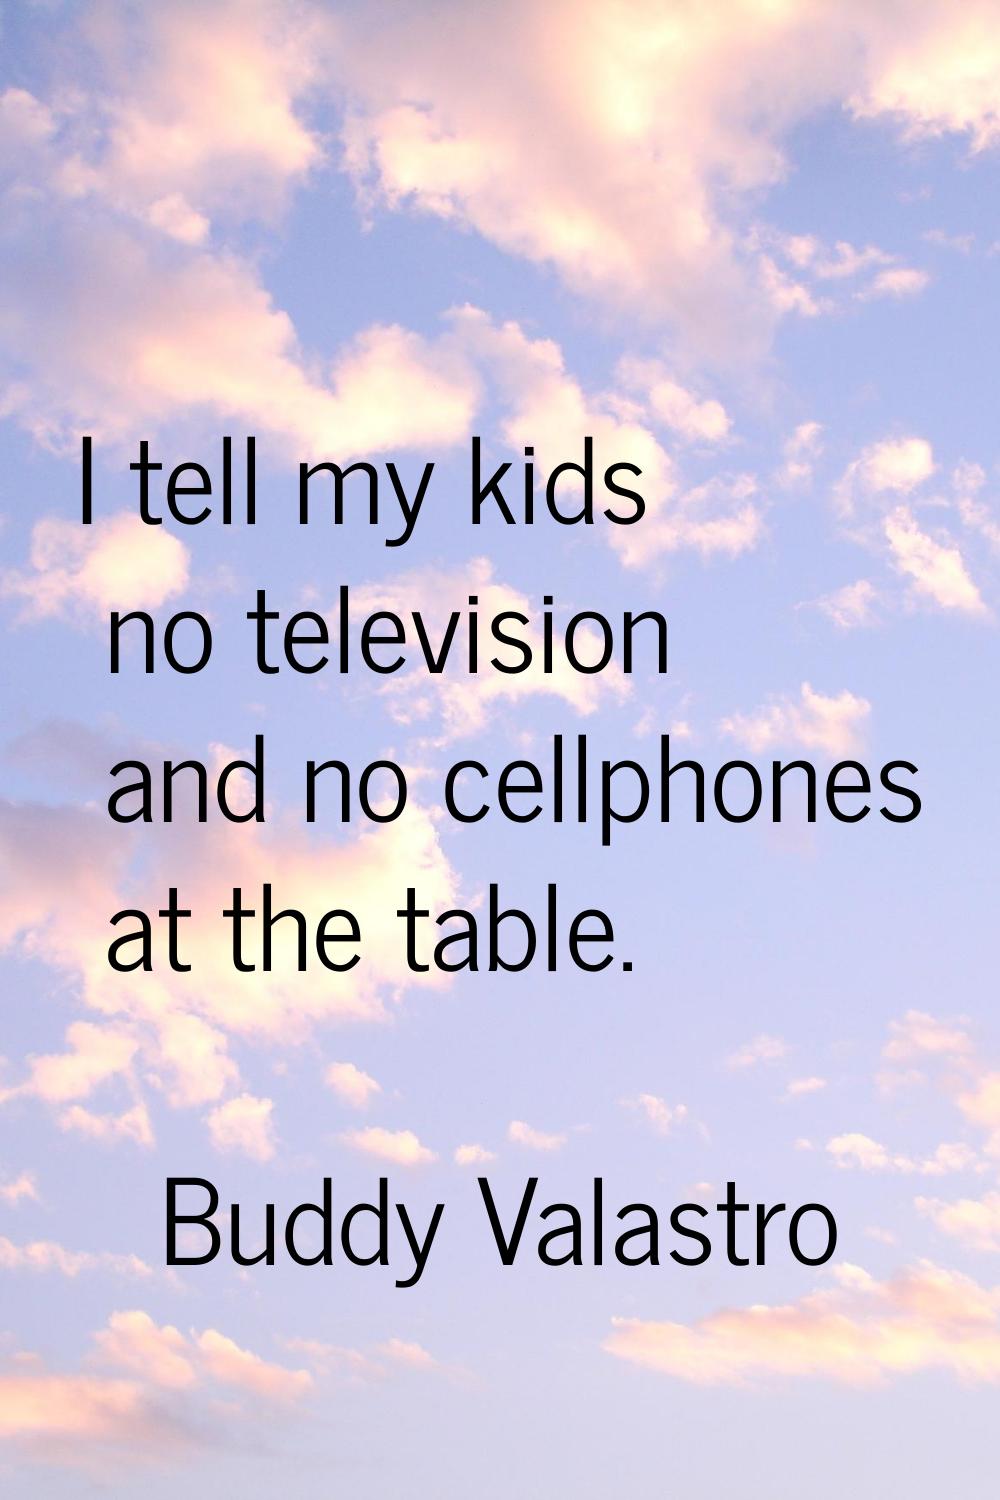 I tell my kids no television and no cellphones at the table.